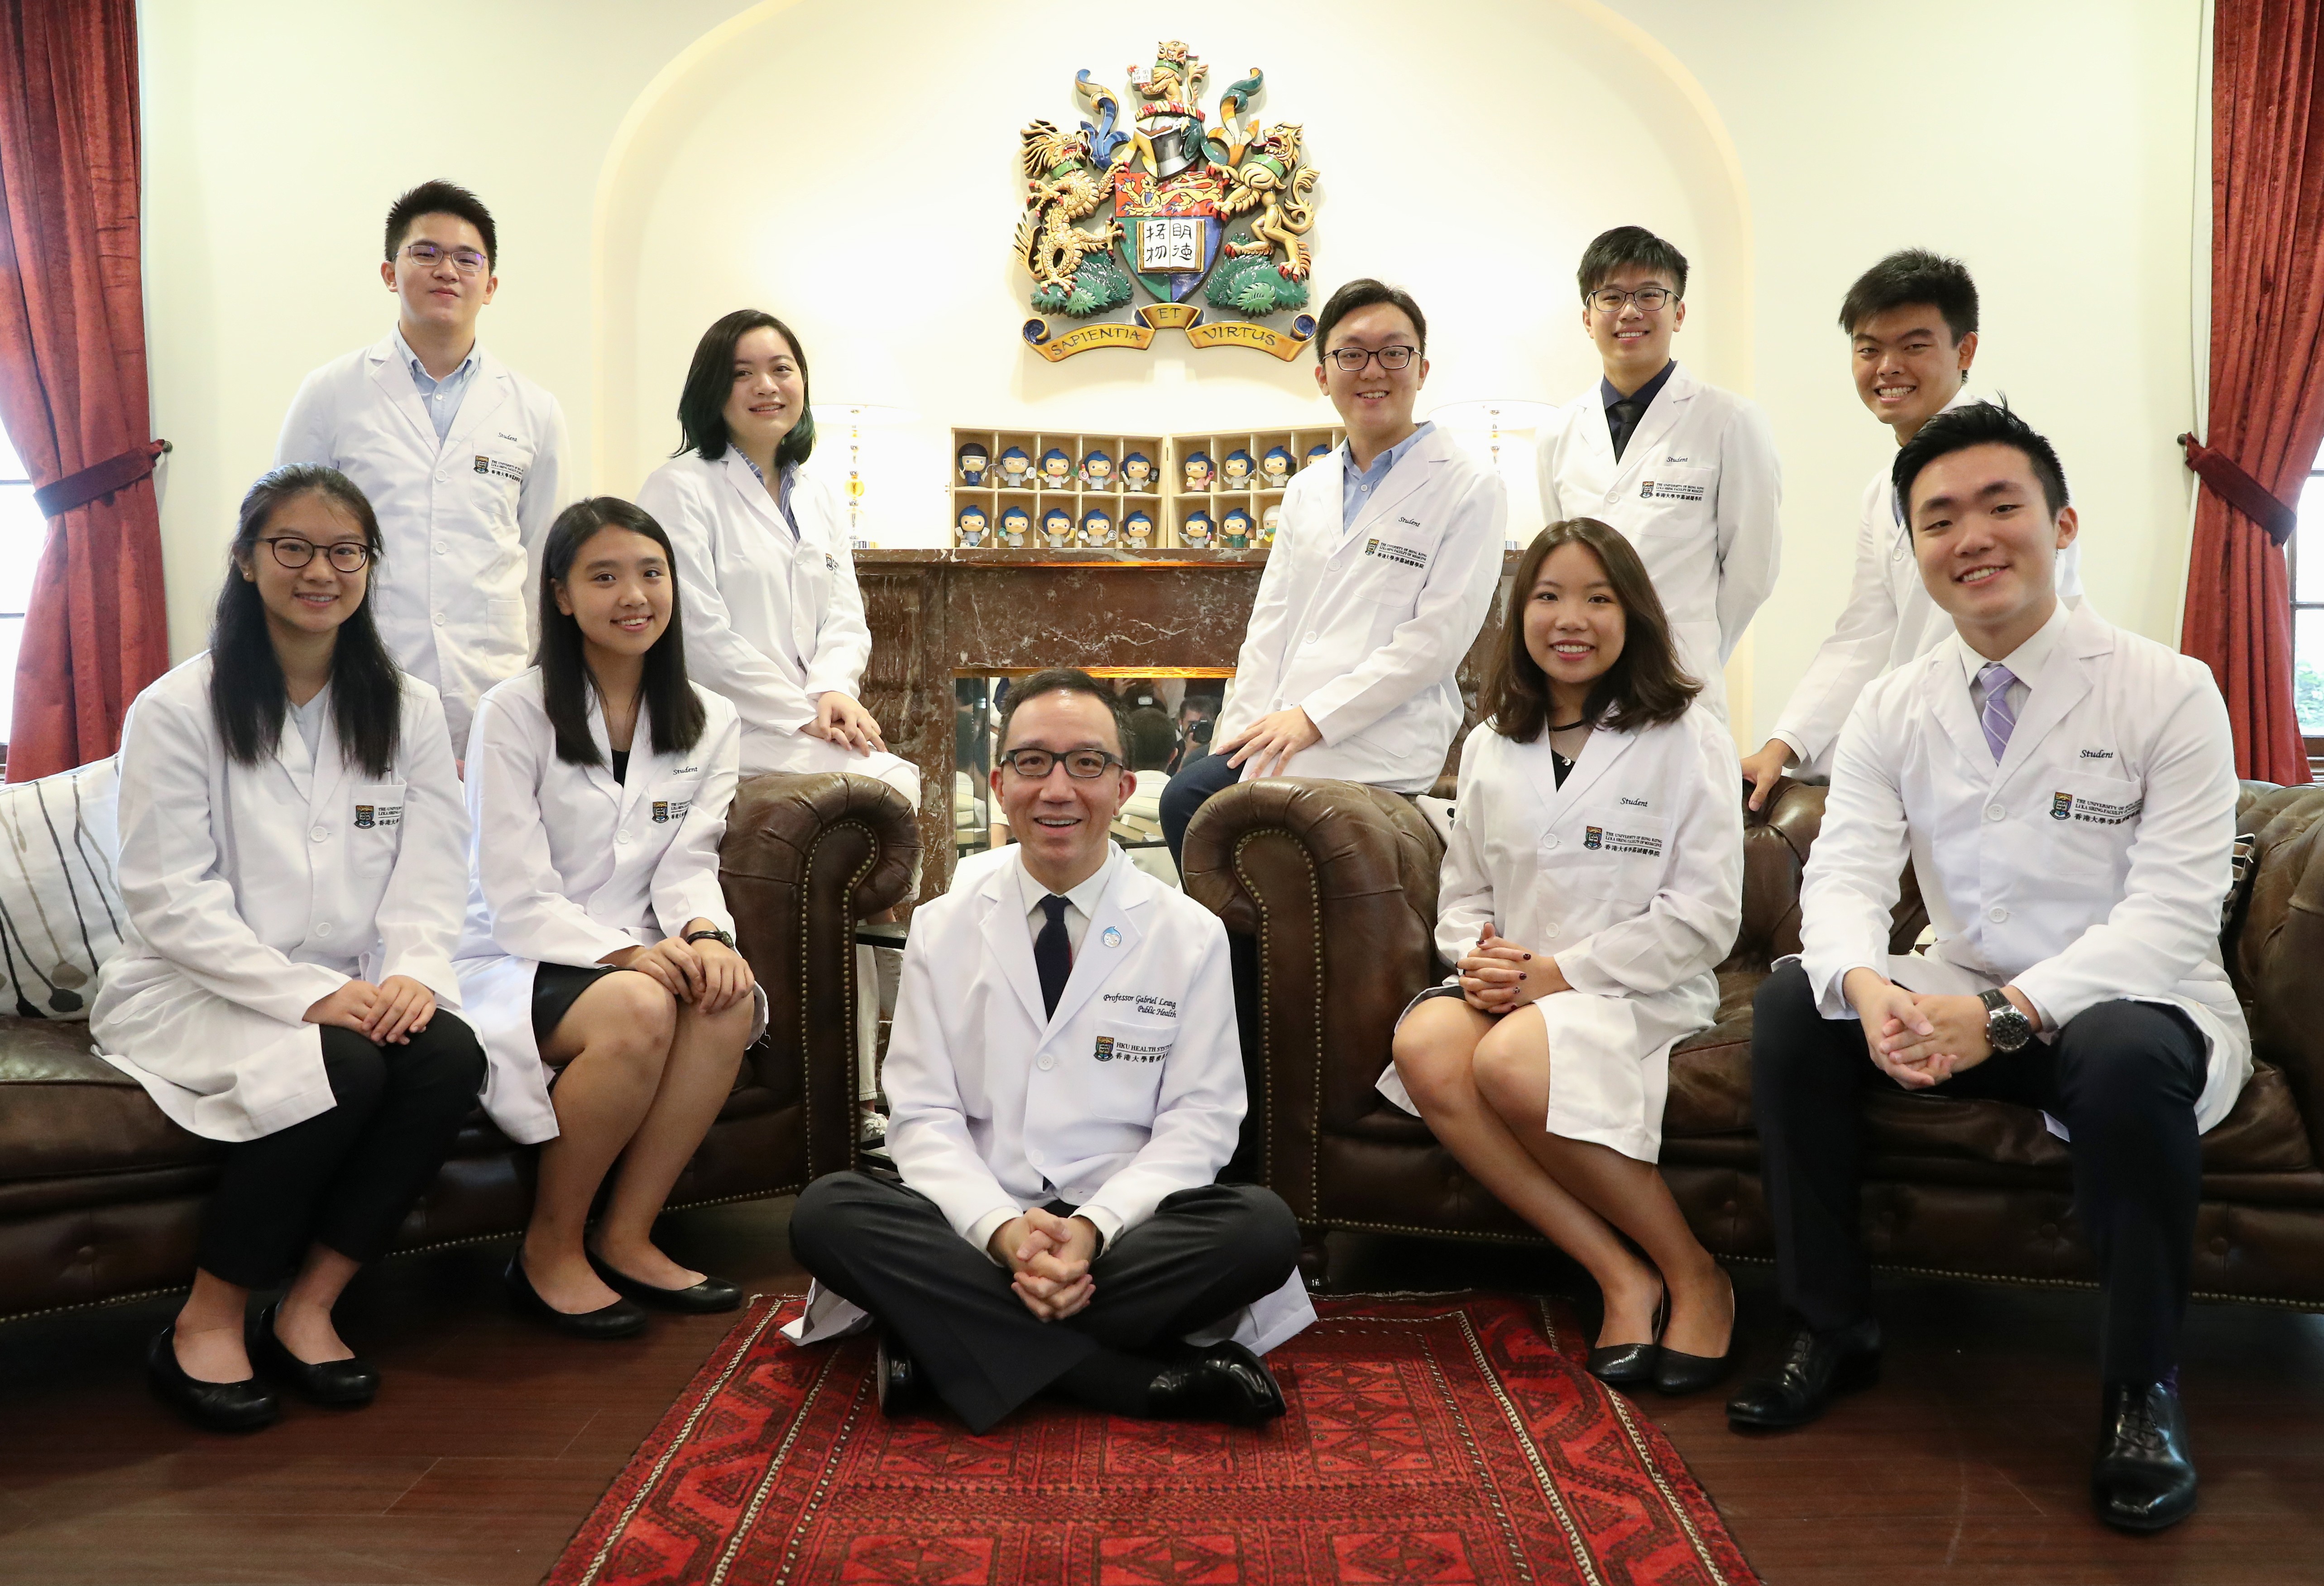 Thomas Wong (back row, third from right) and others who will study medicine at HKU. Photo: K.Y. Cheng